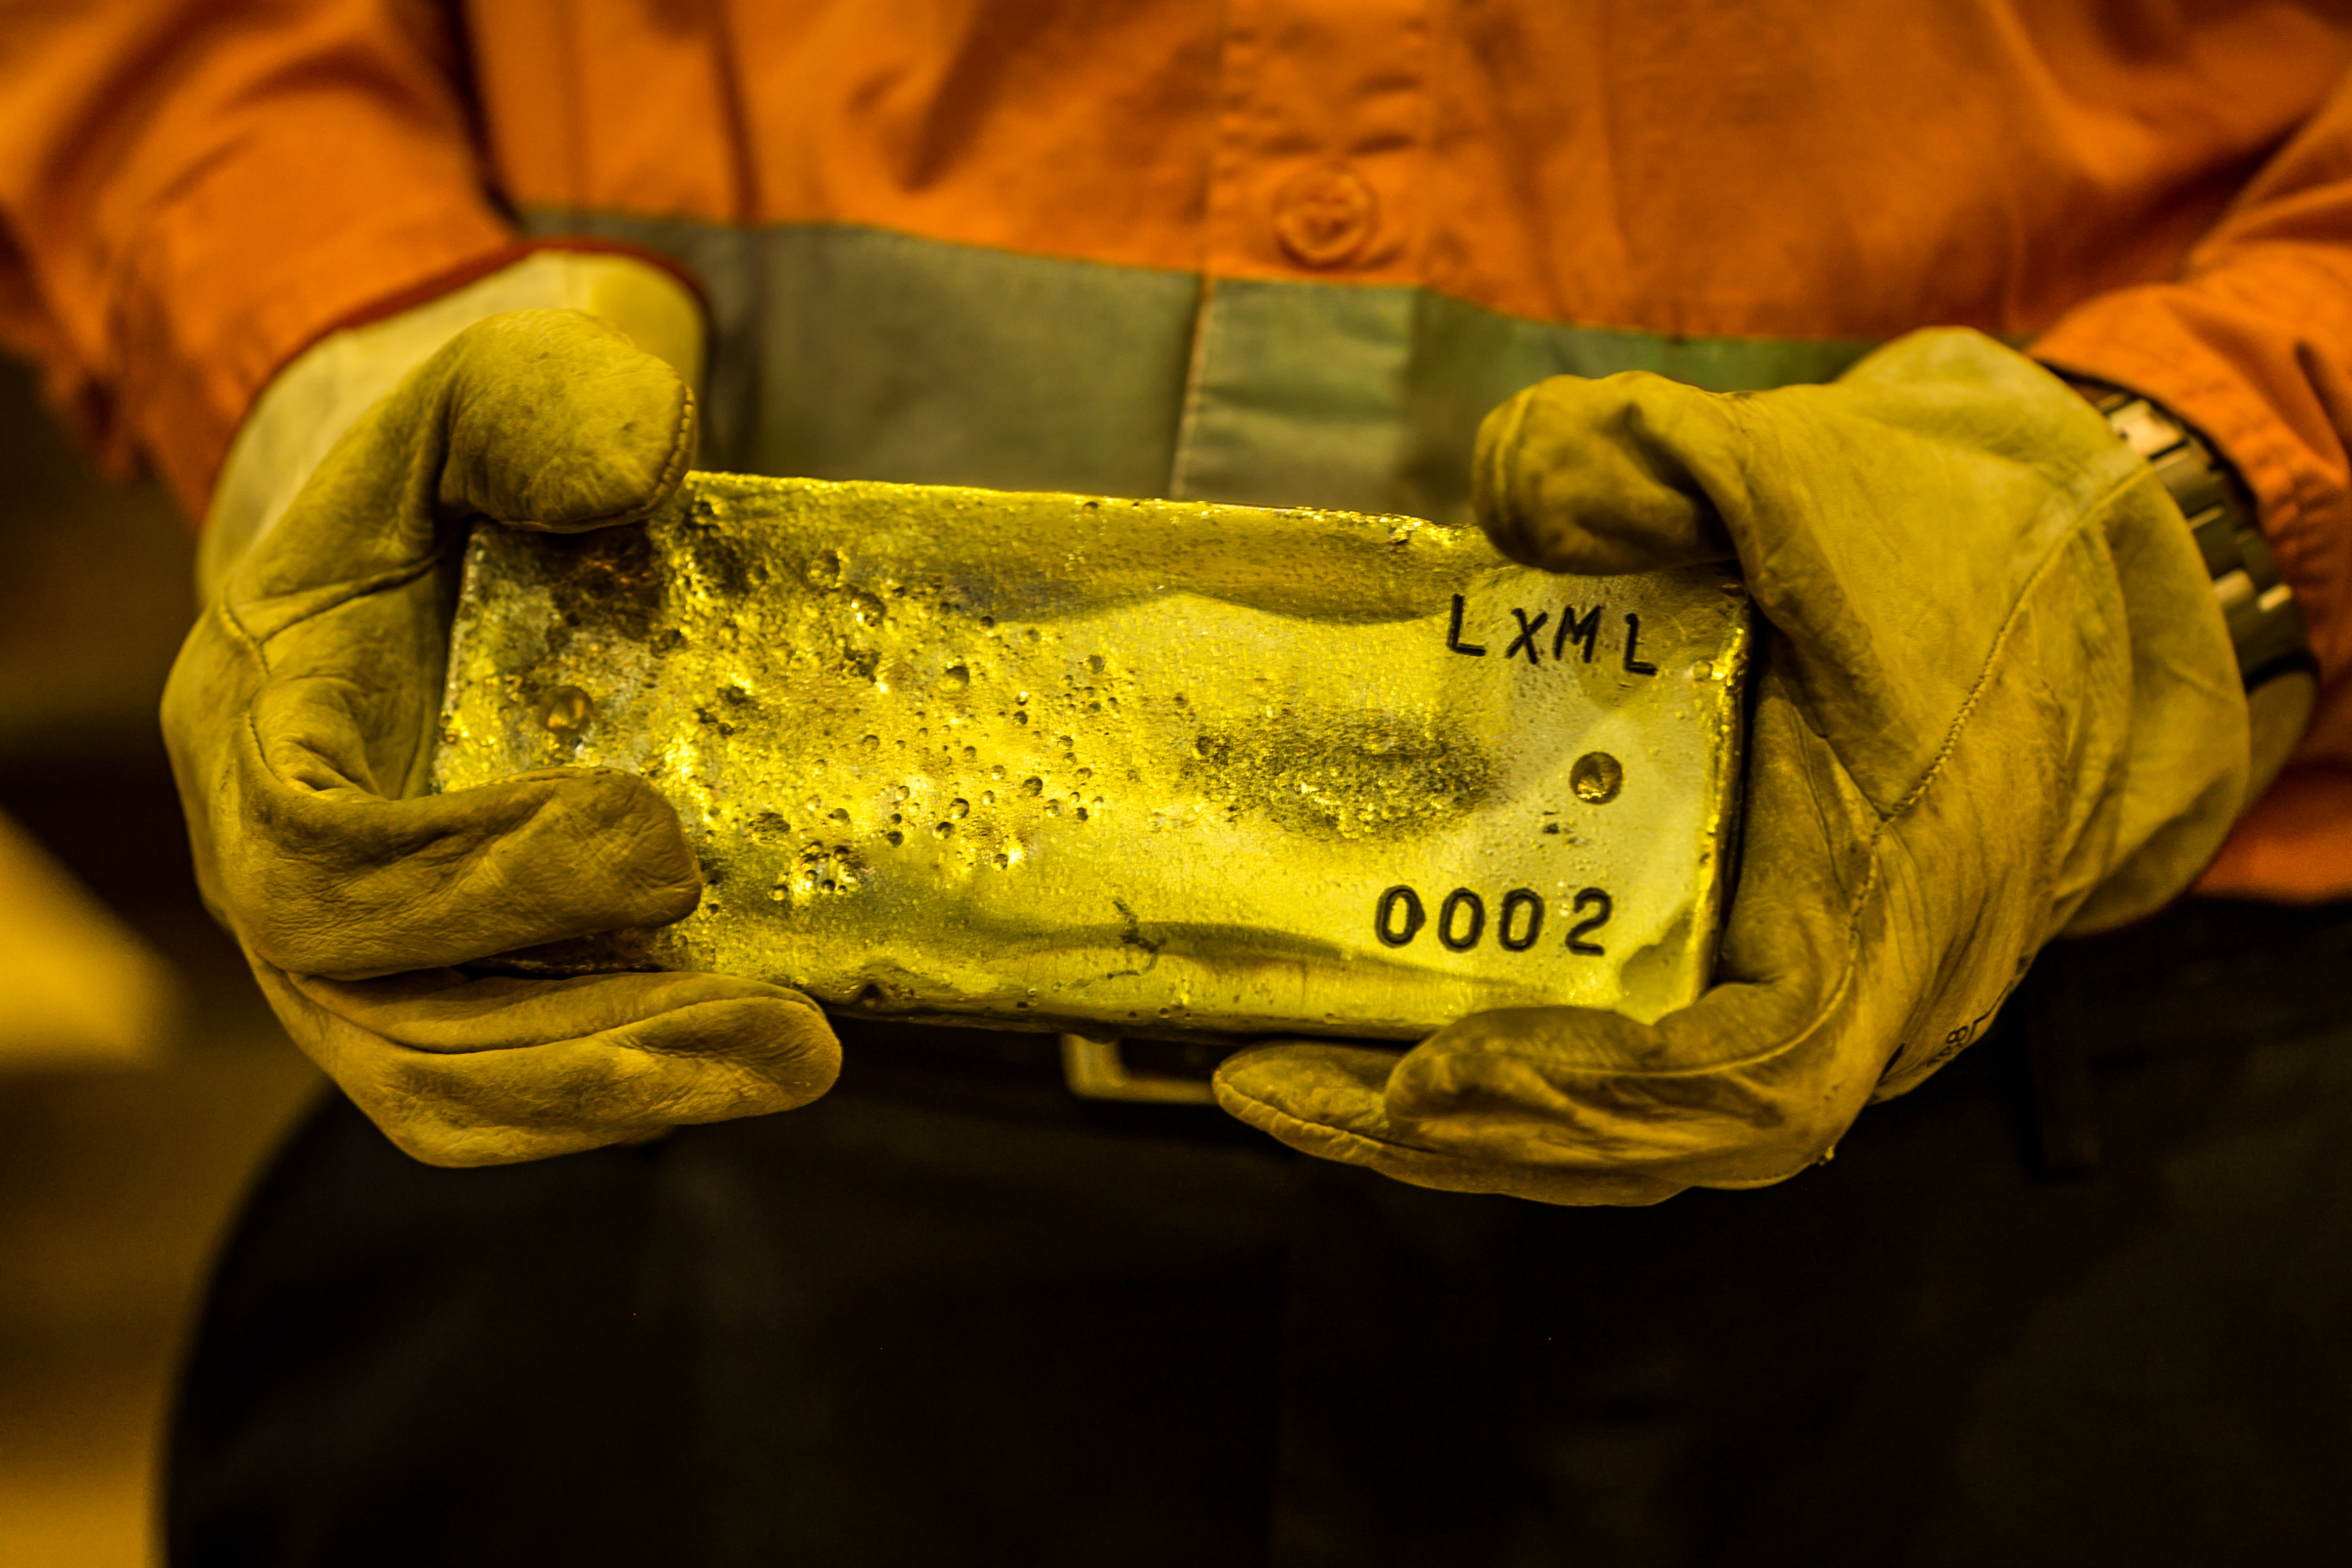 LXML Sepon Mine Produces 6.7 Tonnes Gold in 2022